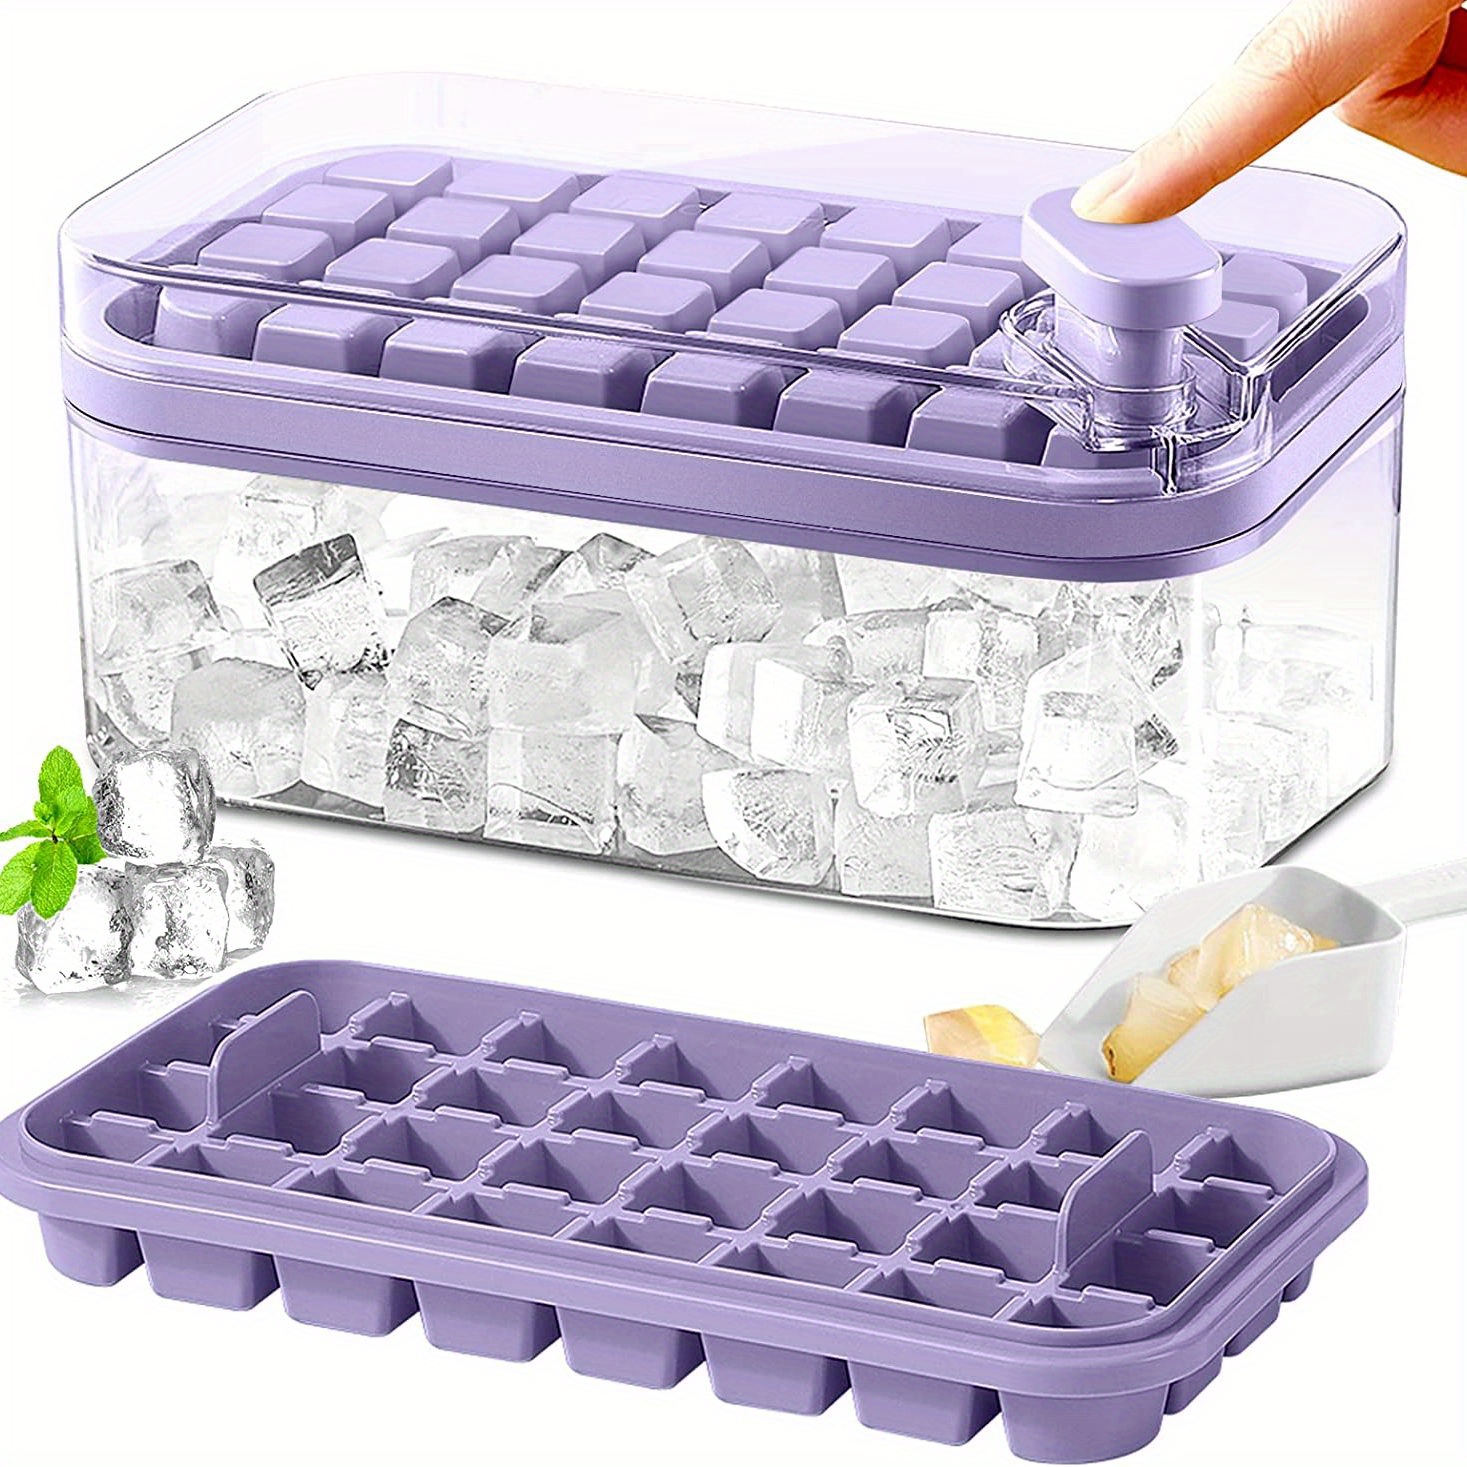 2 packs 64 pcs Convenient Ice Cube Tray with Lid and Bin - Keep Your Drinks Cold and Refreshing with Easy-to-Use Freezer Trays - Purple